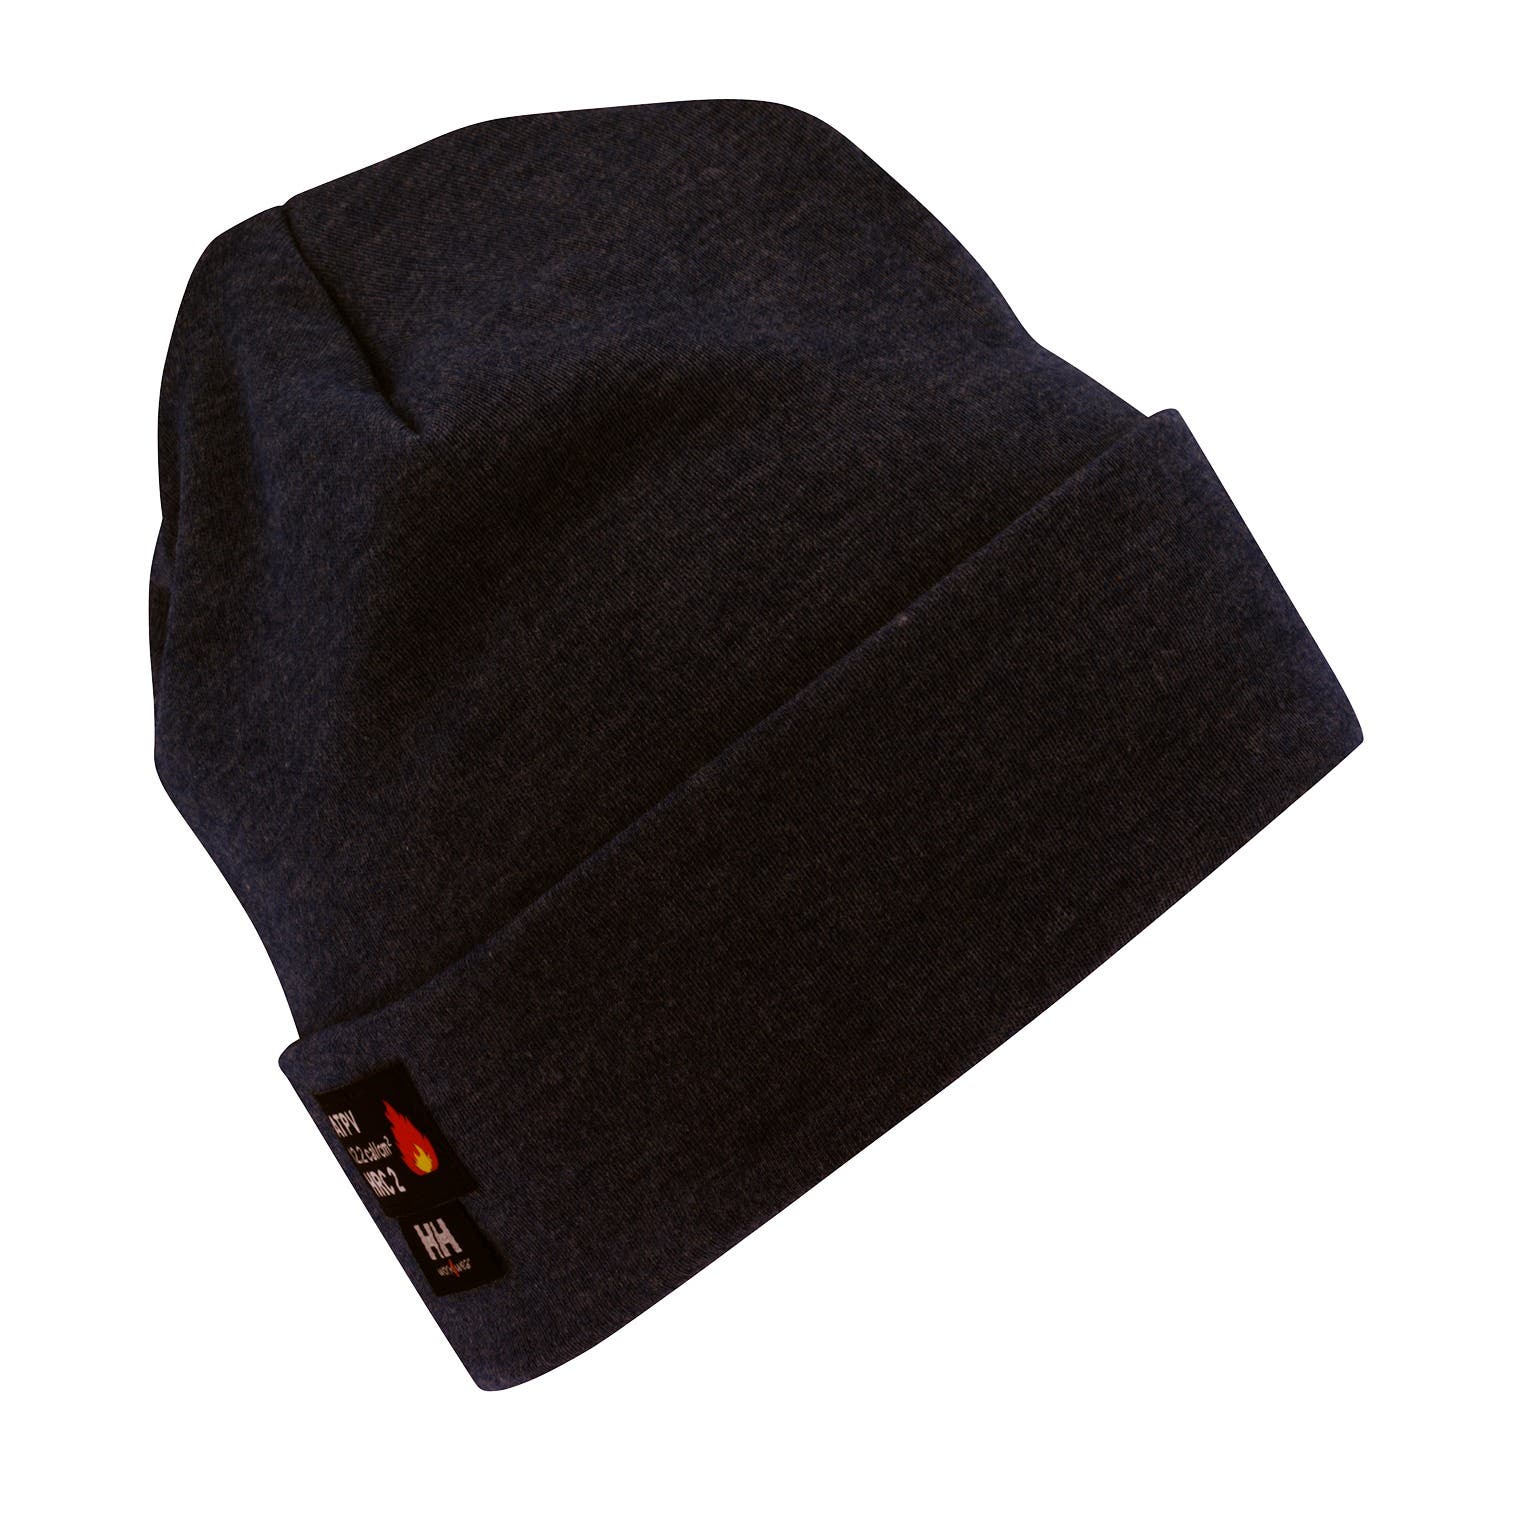 Helly Hansen Unisex Fargo Flame Retardant Tuque Hat in Black from the front